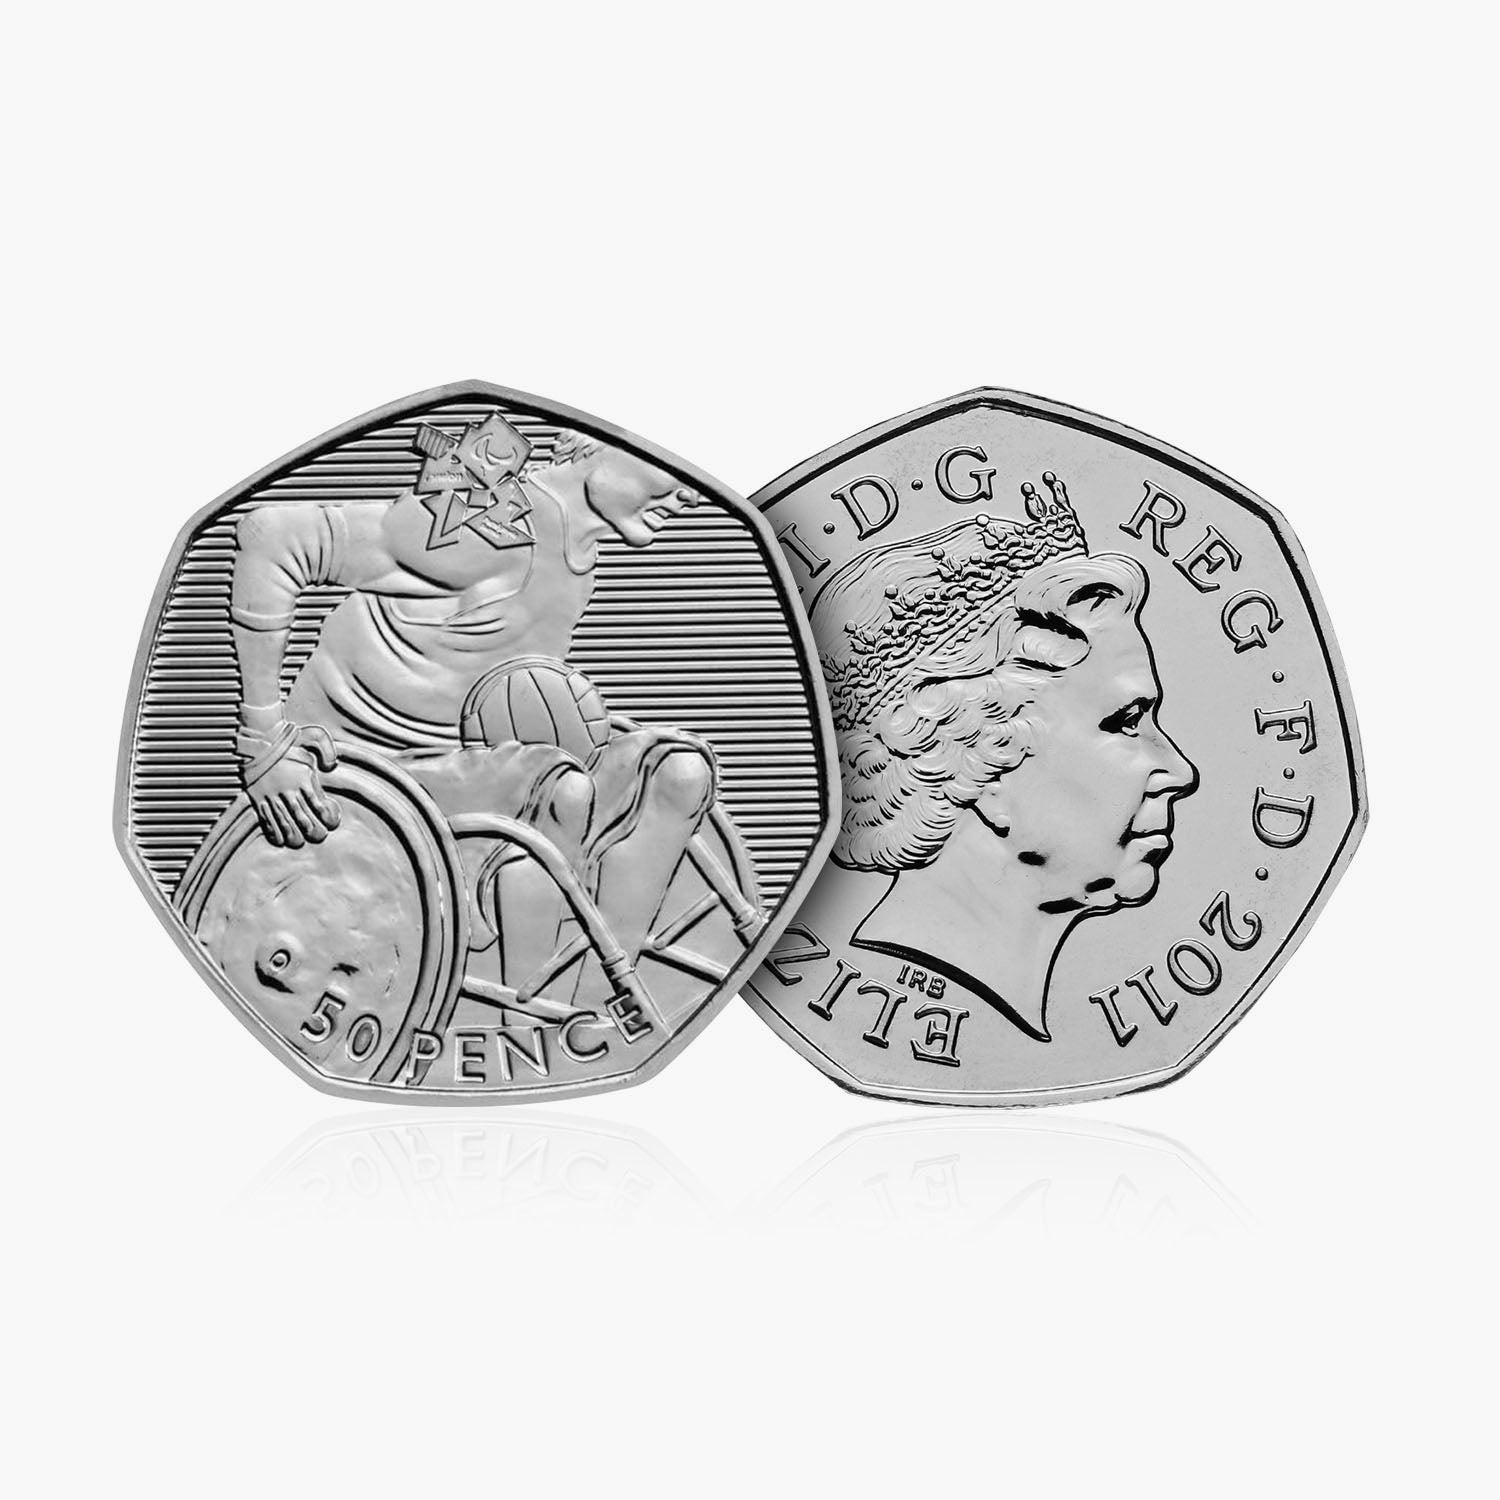 2011 Circulated Olympics - Wheelchair Rugby 50p Coin